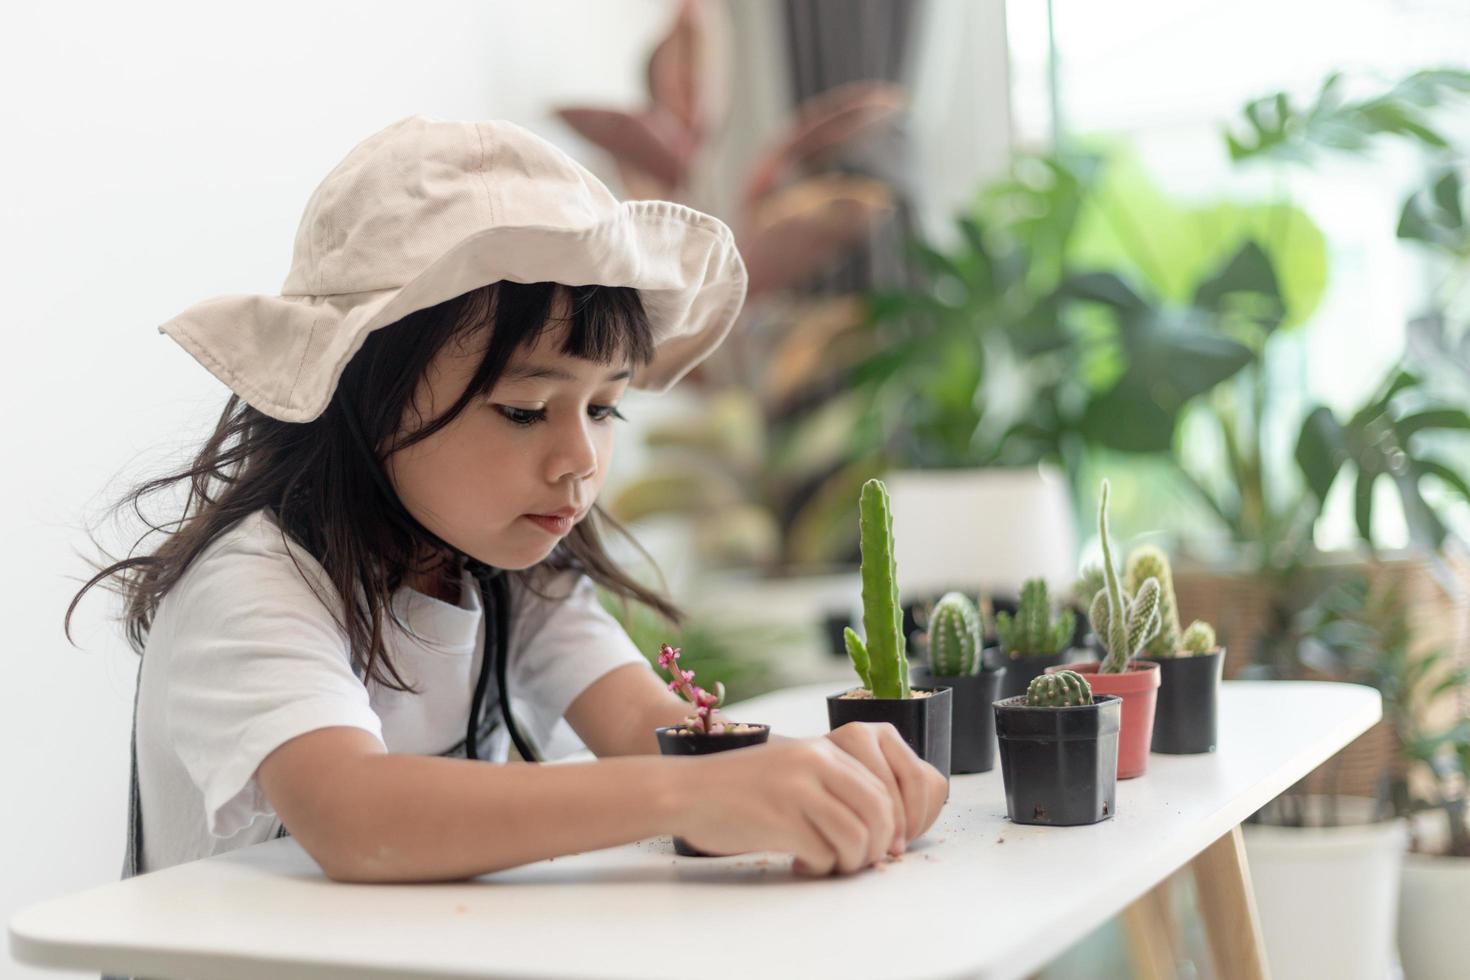 kid gently touch new stem of the cactus he grows with care, one hand holds magnifying glass.Nature education, Montessori and observation skills concept. photo